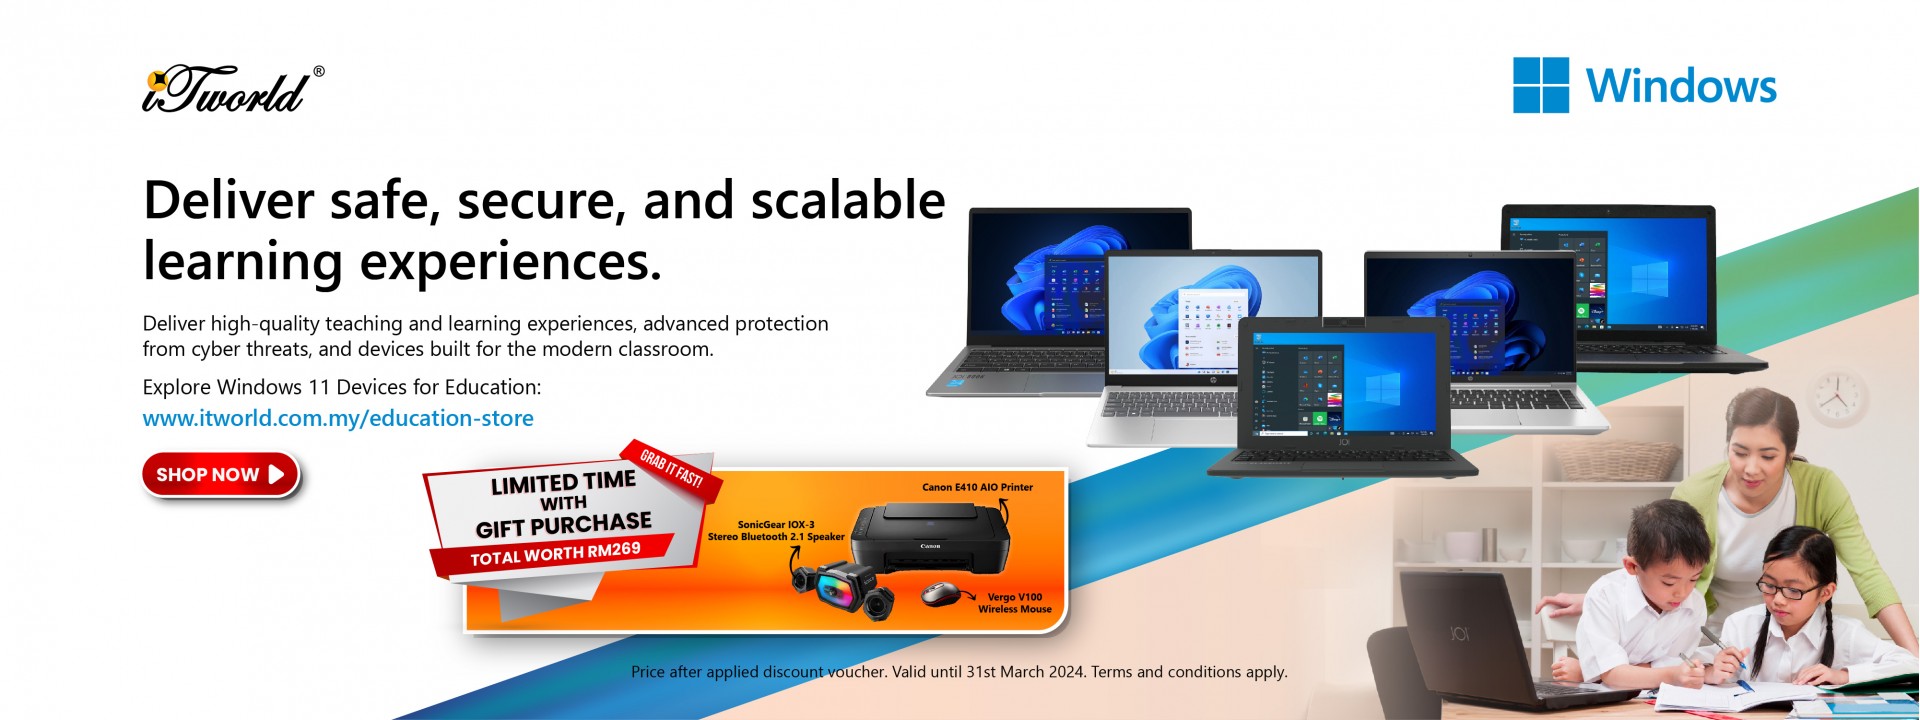 Deliver safe, secure, and scalable learning experience